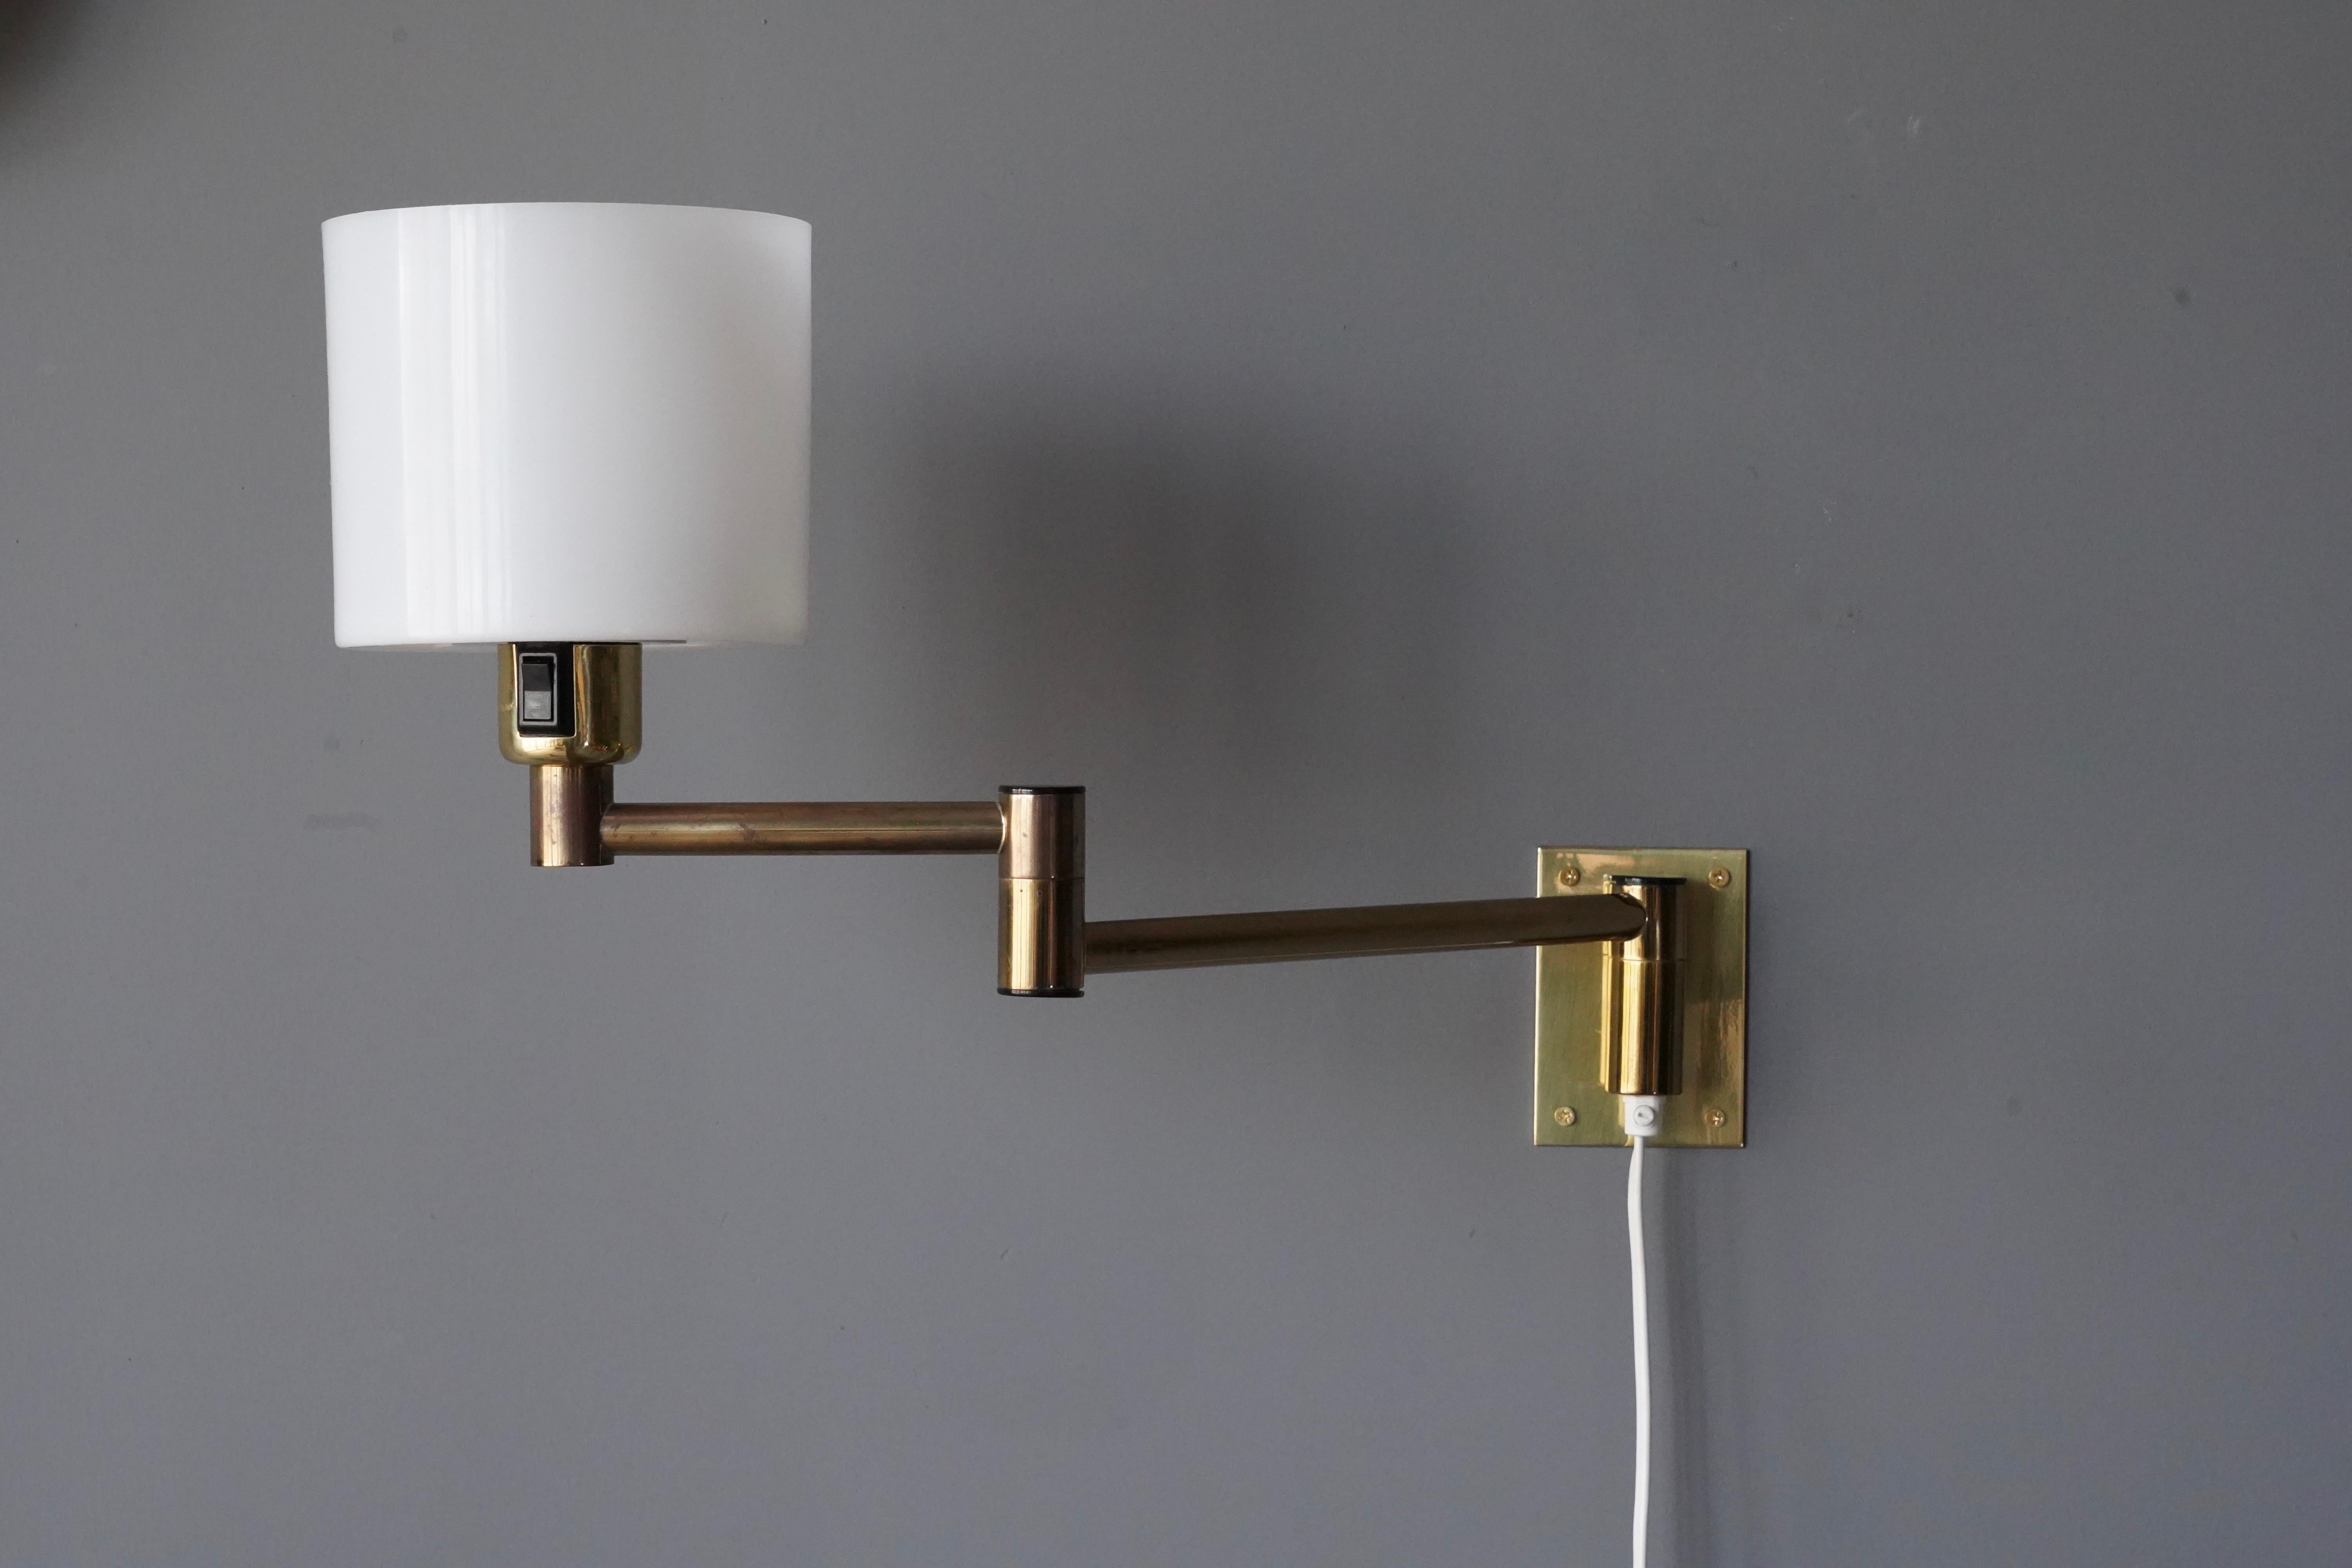 Modern Fagerhults, Adjustable Wall Lights, Brass, Acrylic, Sweden, 1970s For Sale